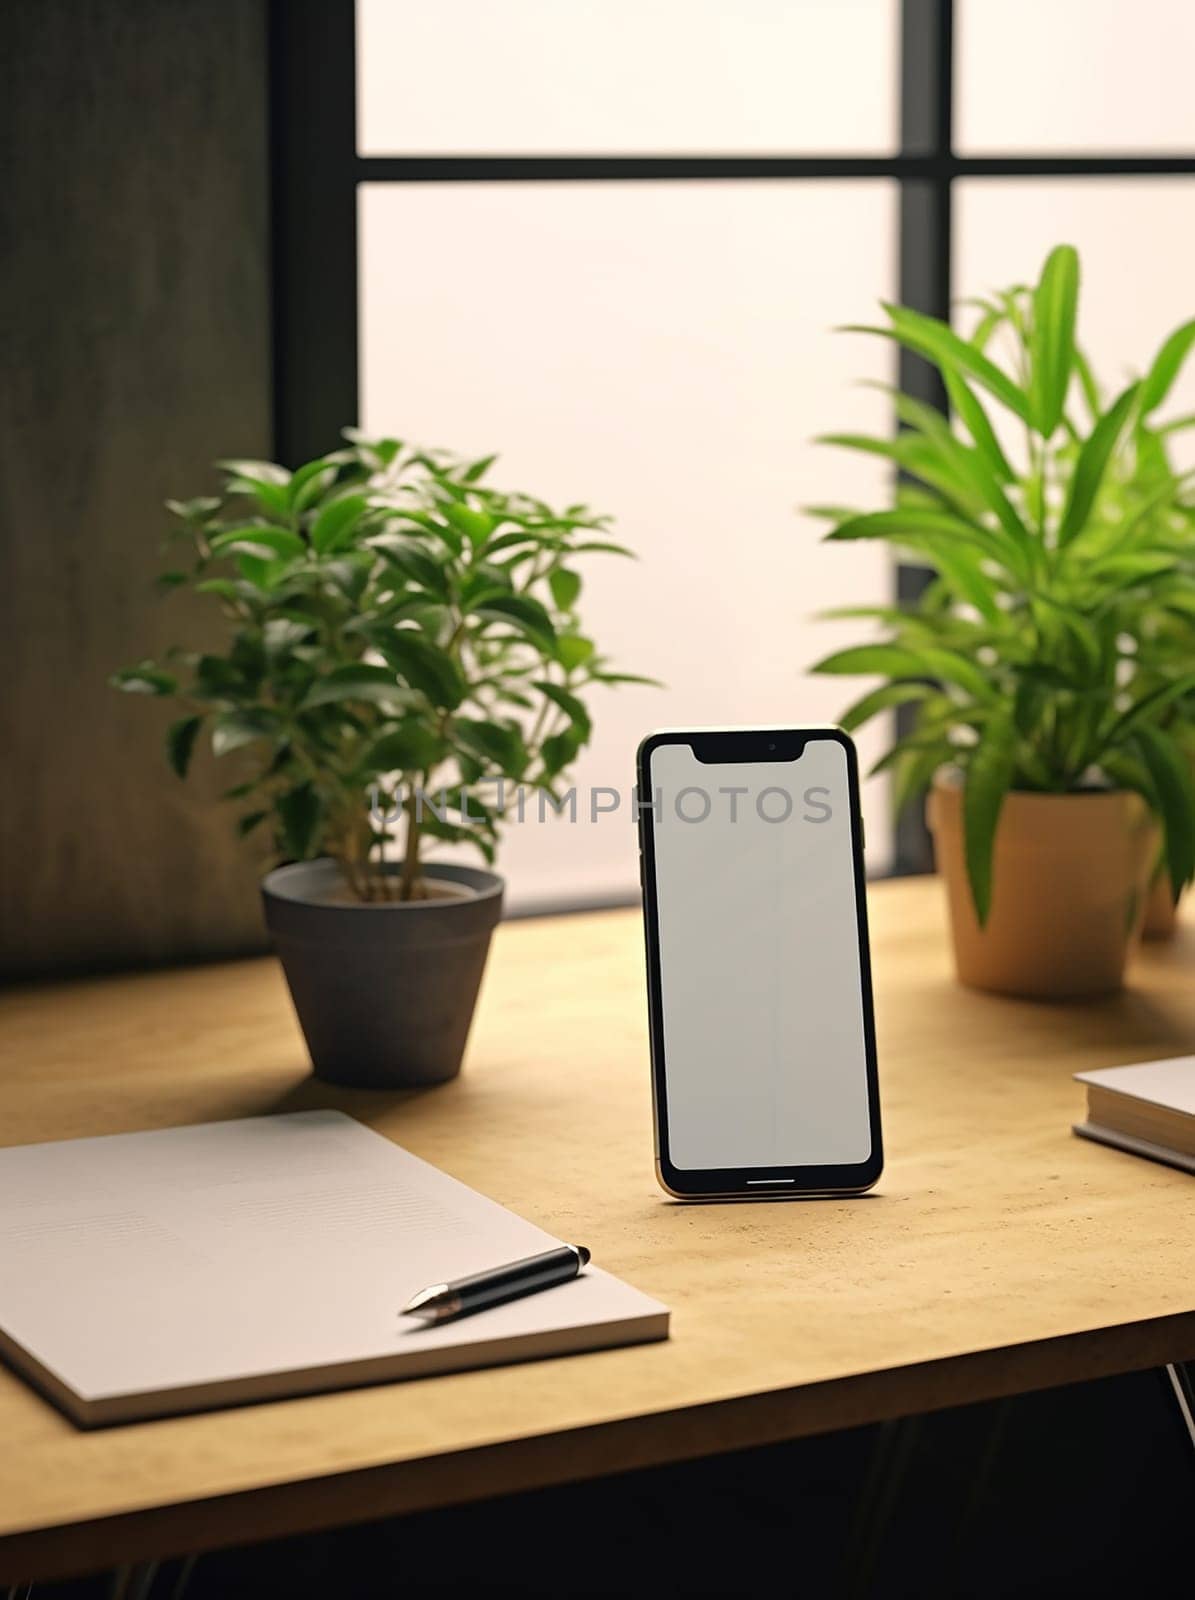 Smartphone mock up on desk with blank screen, surrounded by plants and notebook. by Hype2art